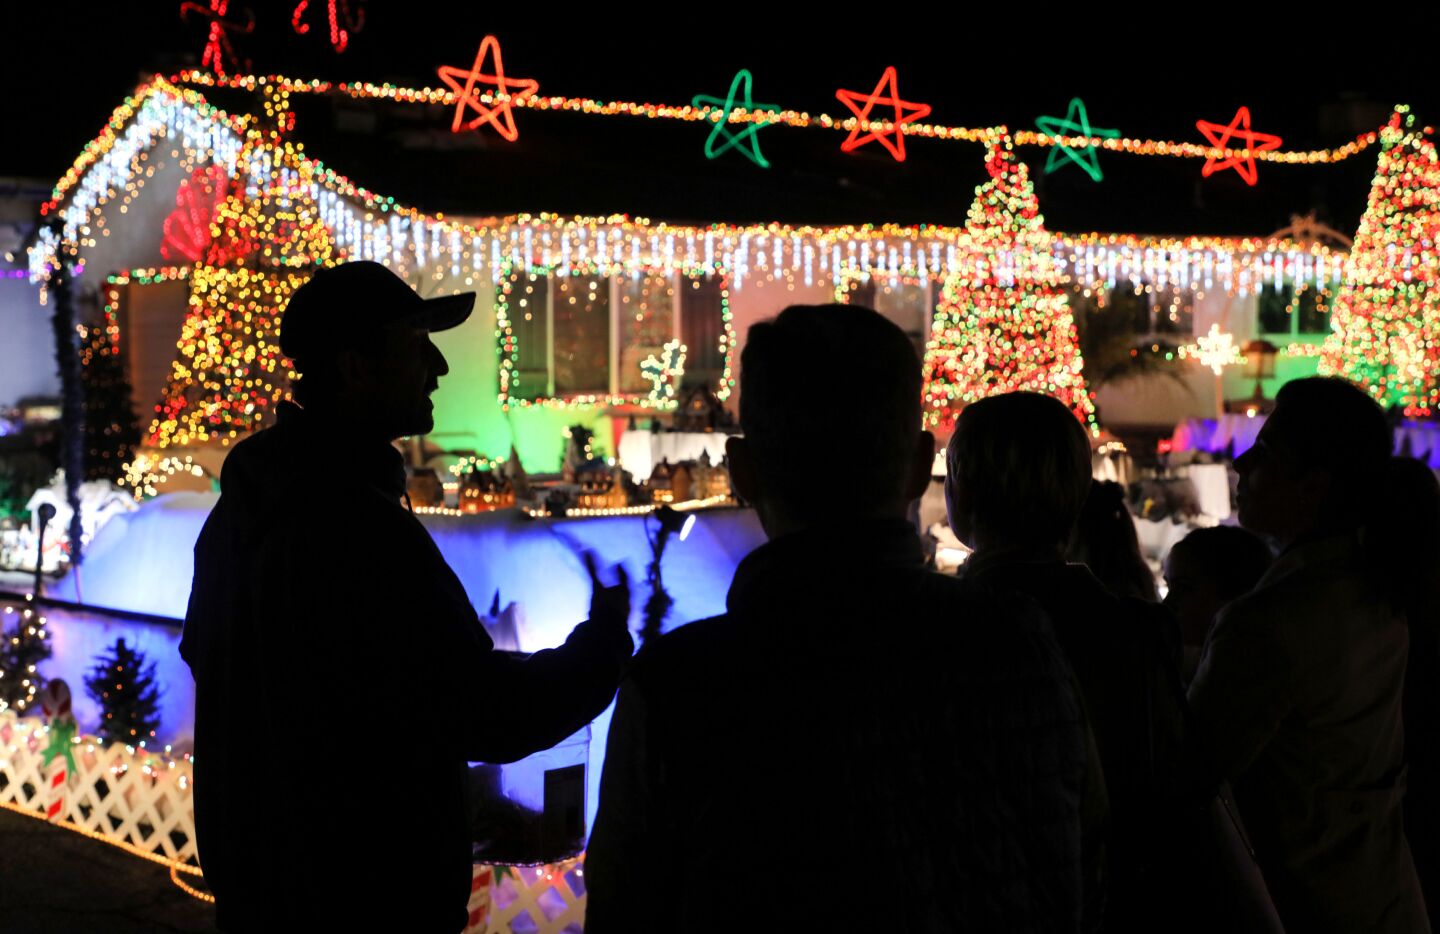 Mack Schreiber, left, speaks to visitors there to see the extensive Christmas decorations at his home on Reche Road in Fallbrook.